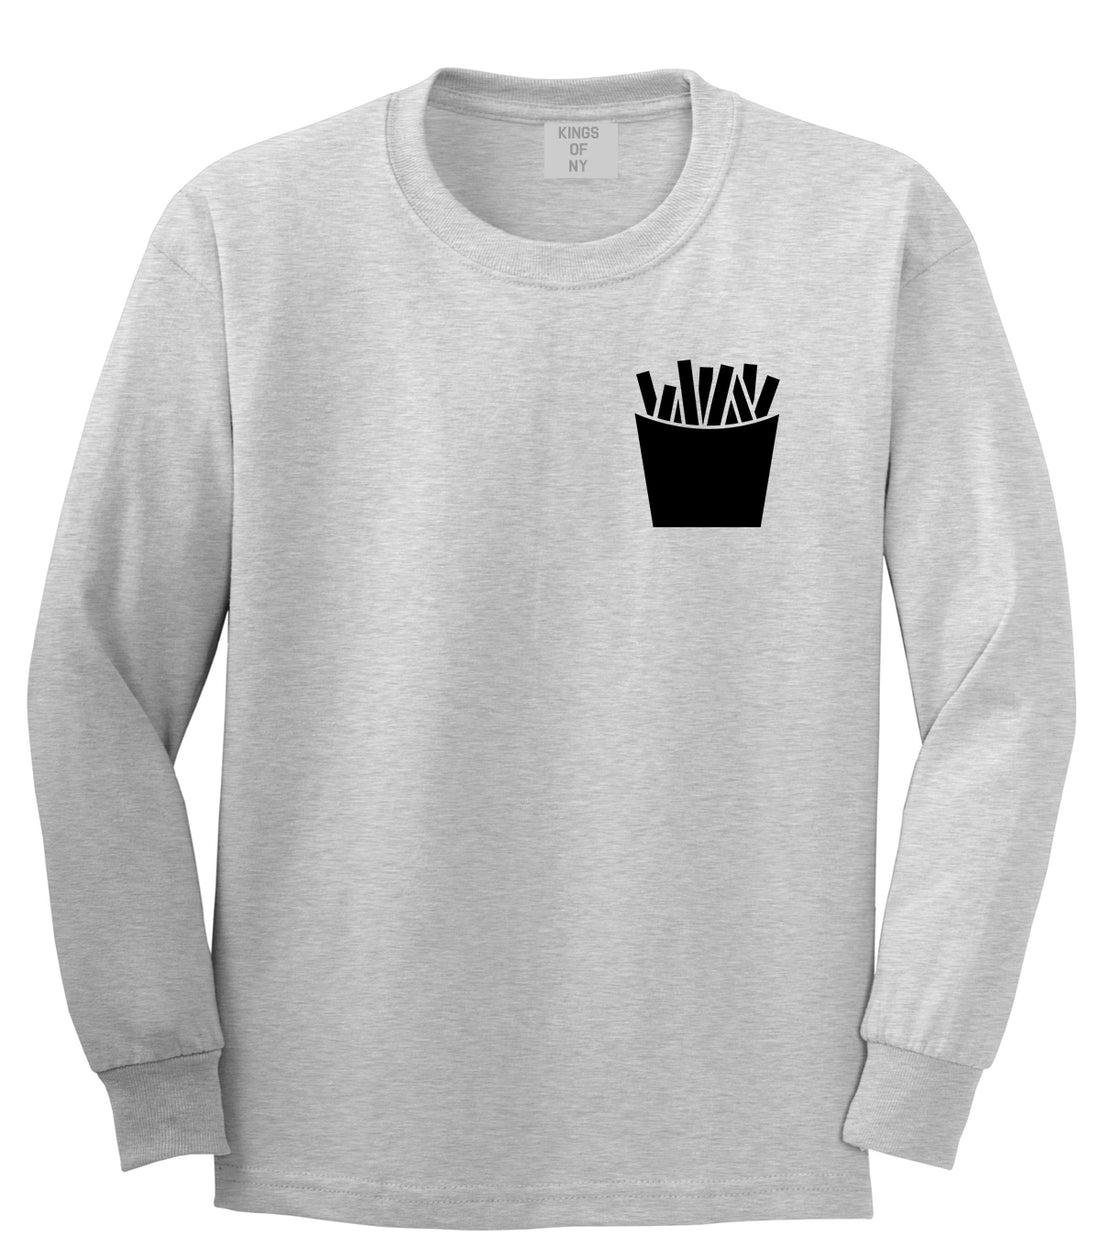 French Fry Fries Chest Mens Grey Long Sleeve T-Shirt by KINGS OF NY